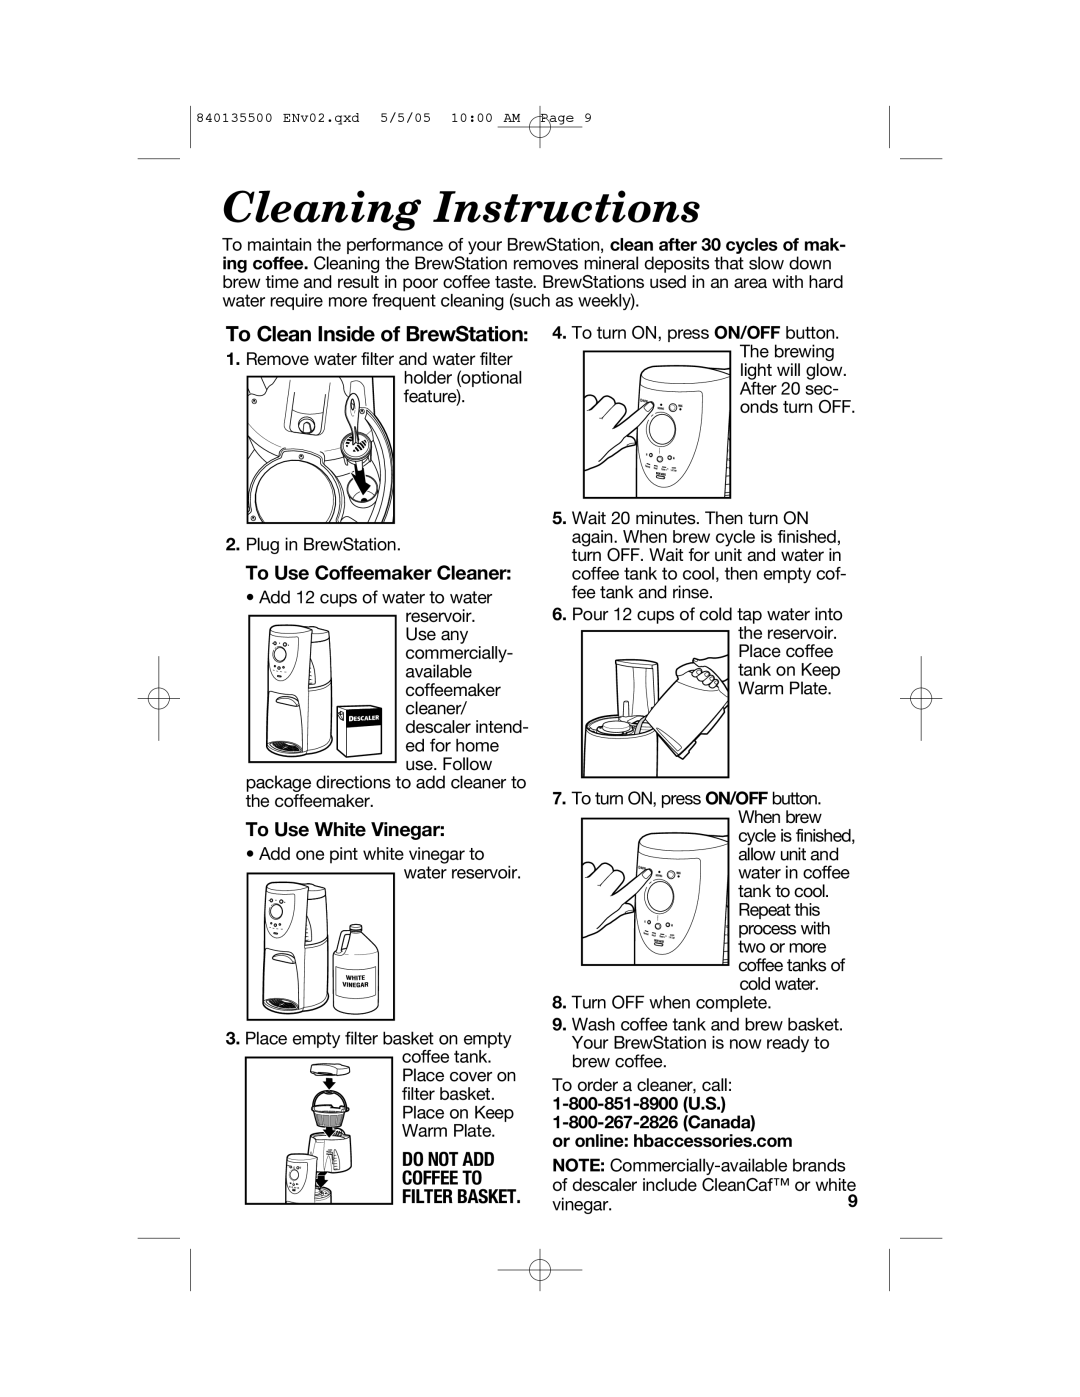 Hamilton Beach 47451 Cleaning Instructions, To Clean Inside of BrewStation, To Use Coffeemaker Cleaner, Filter Basket 